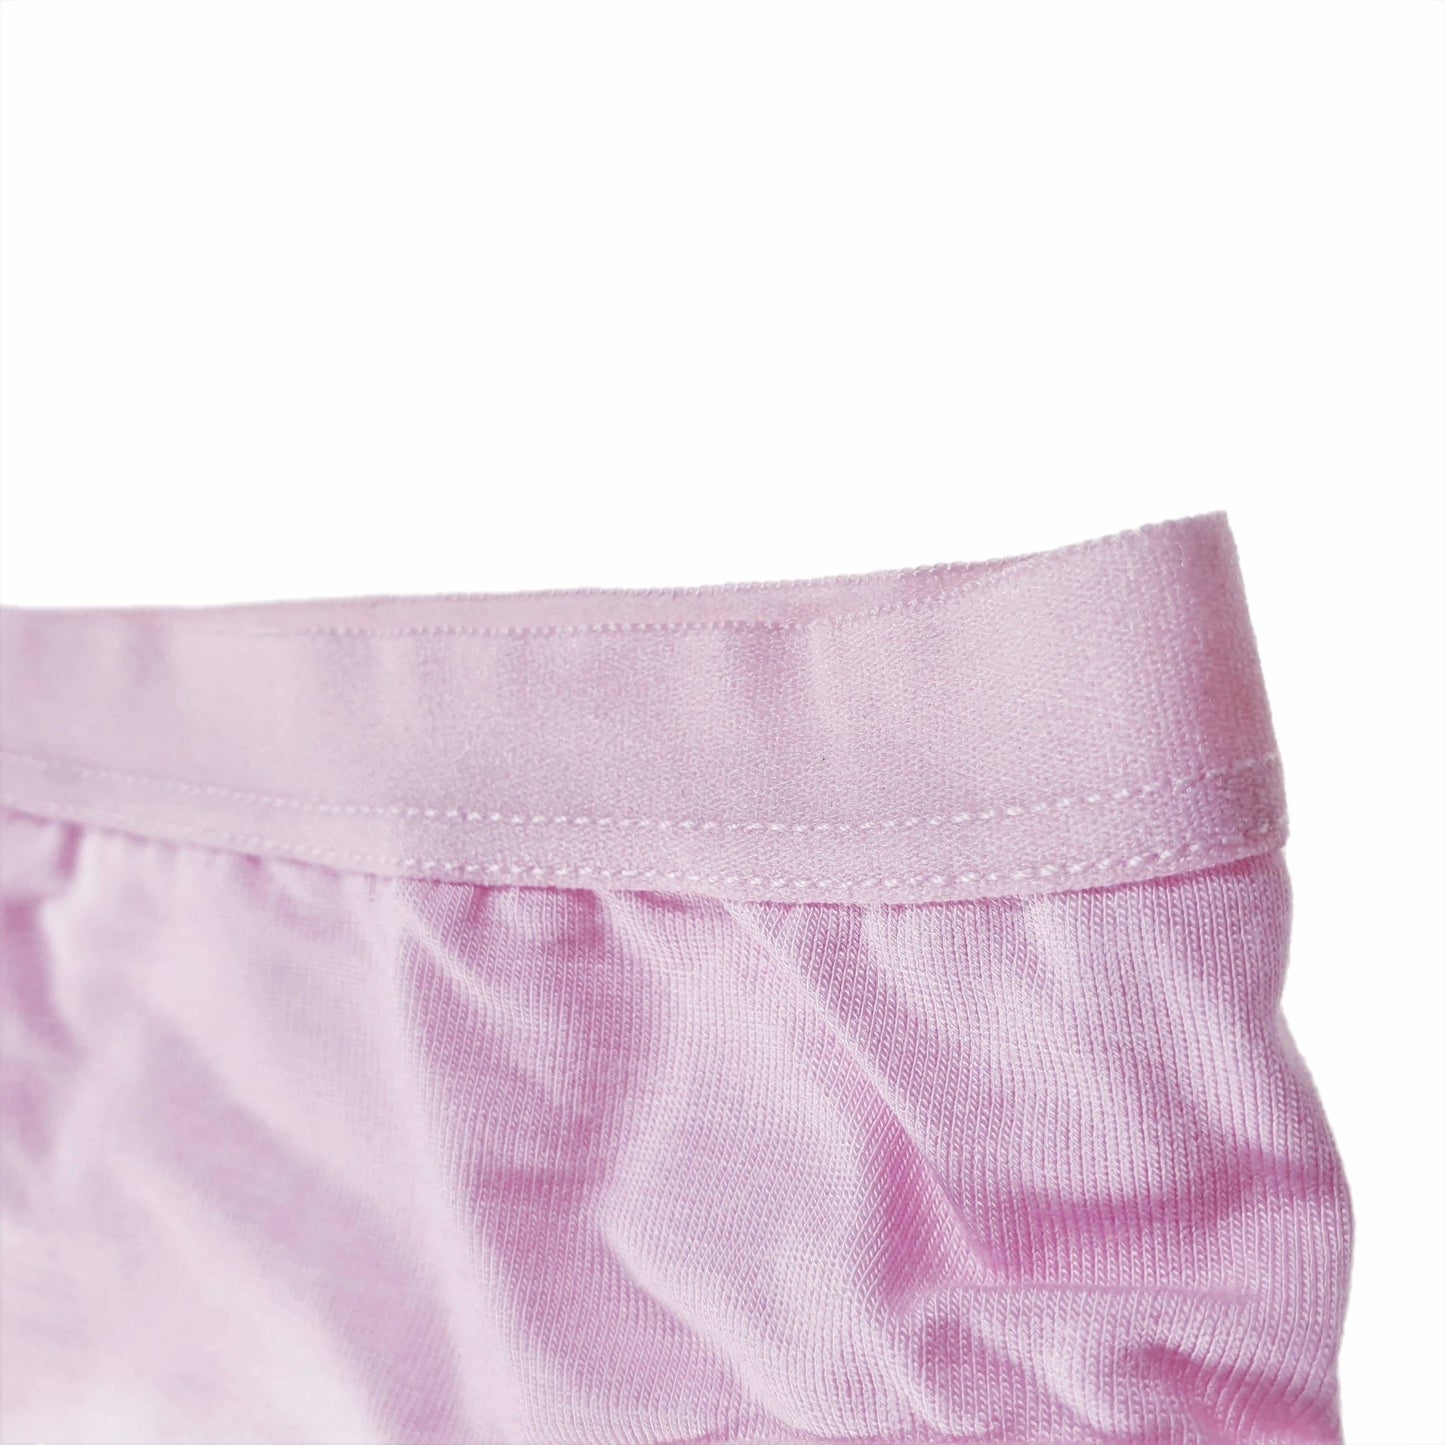 Girls Briefs (5-Pack Set) - With Thin Elastic Band